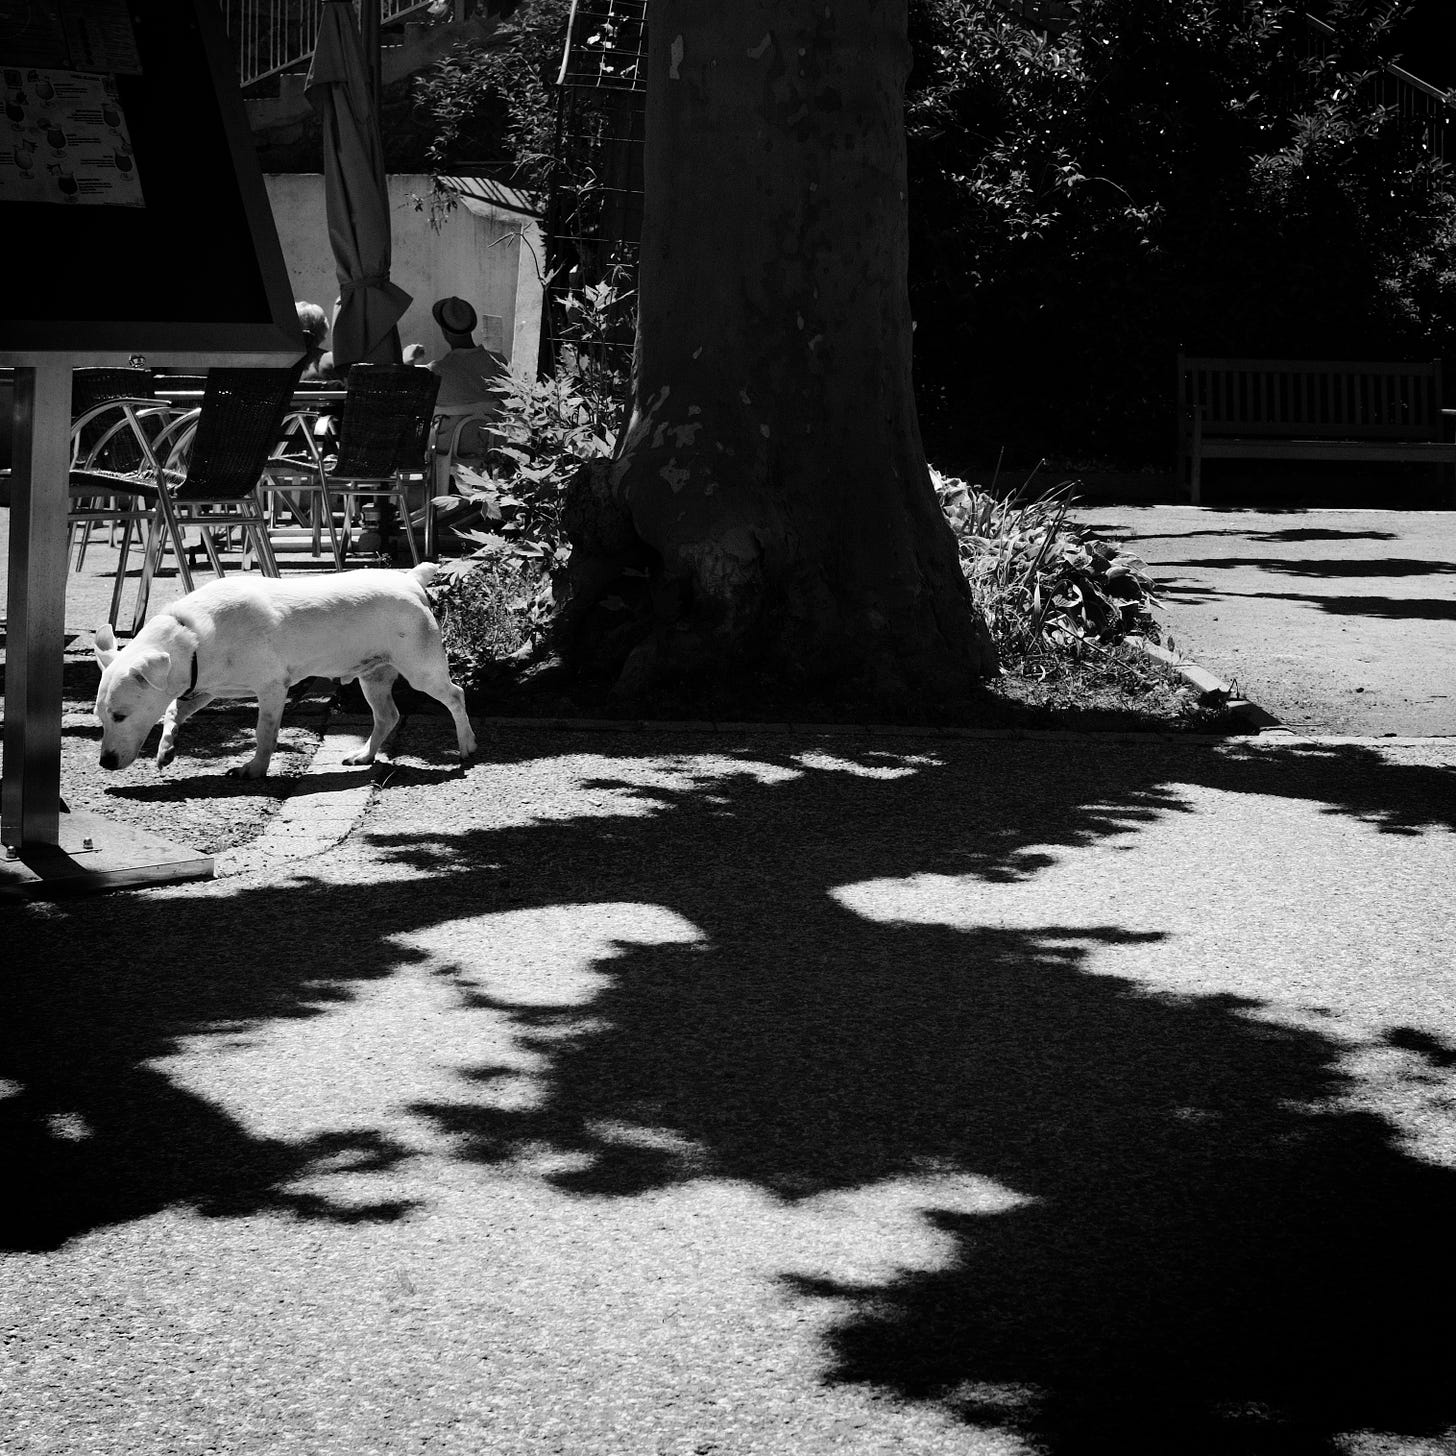 black and white image of tree trunk with shadows, a small white dog to the left and two people sitting in an outdoor cafe with chairs in the background